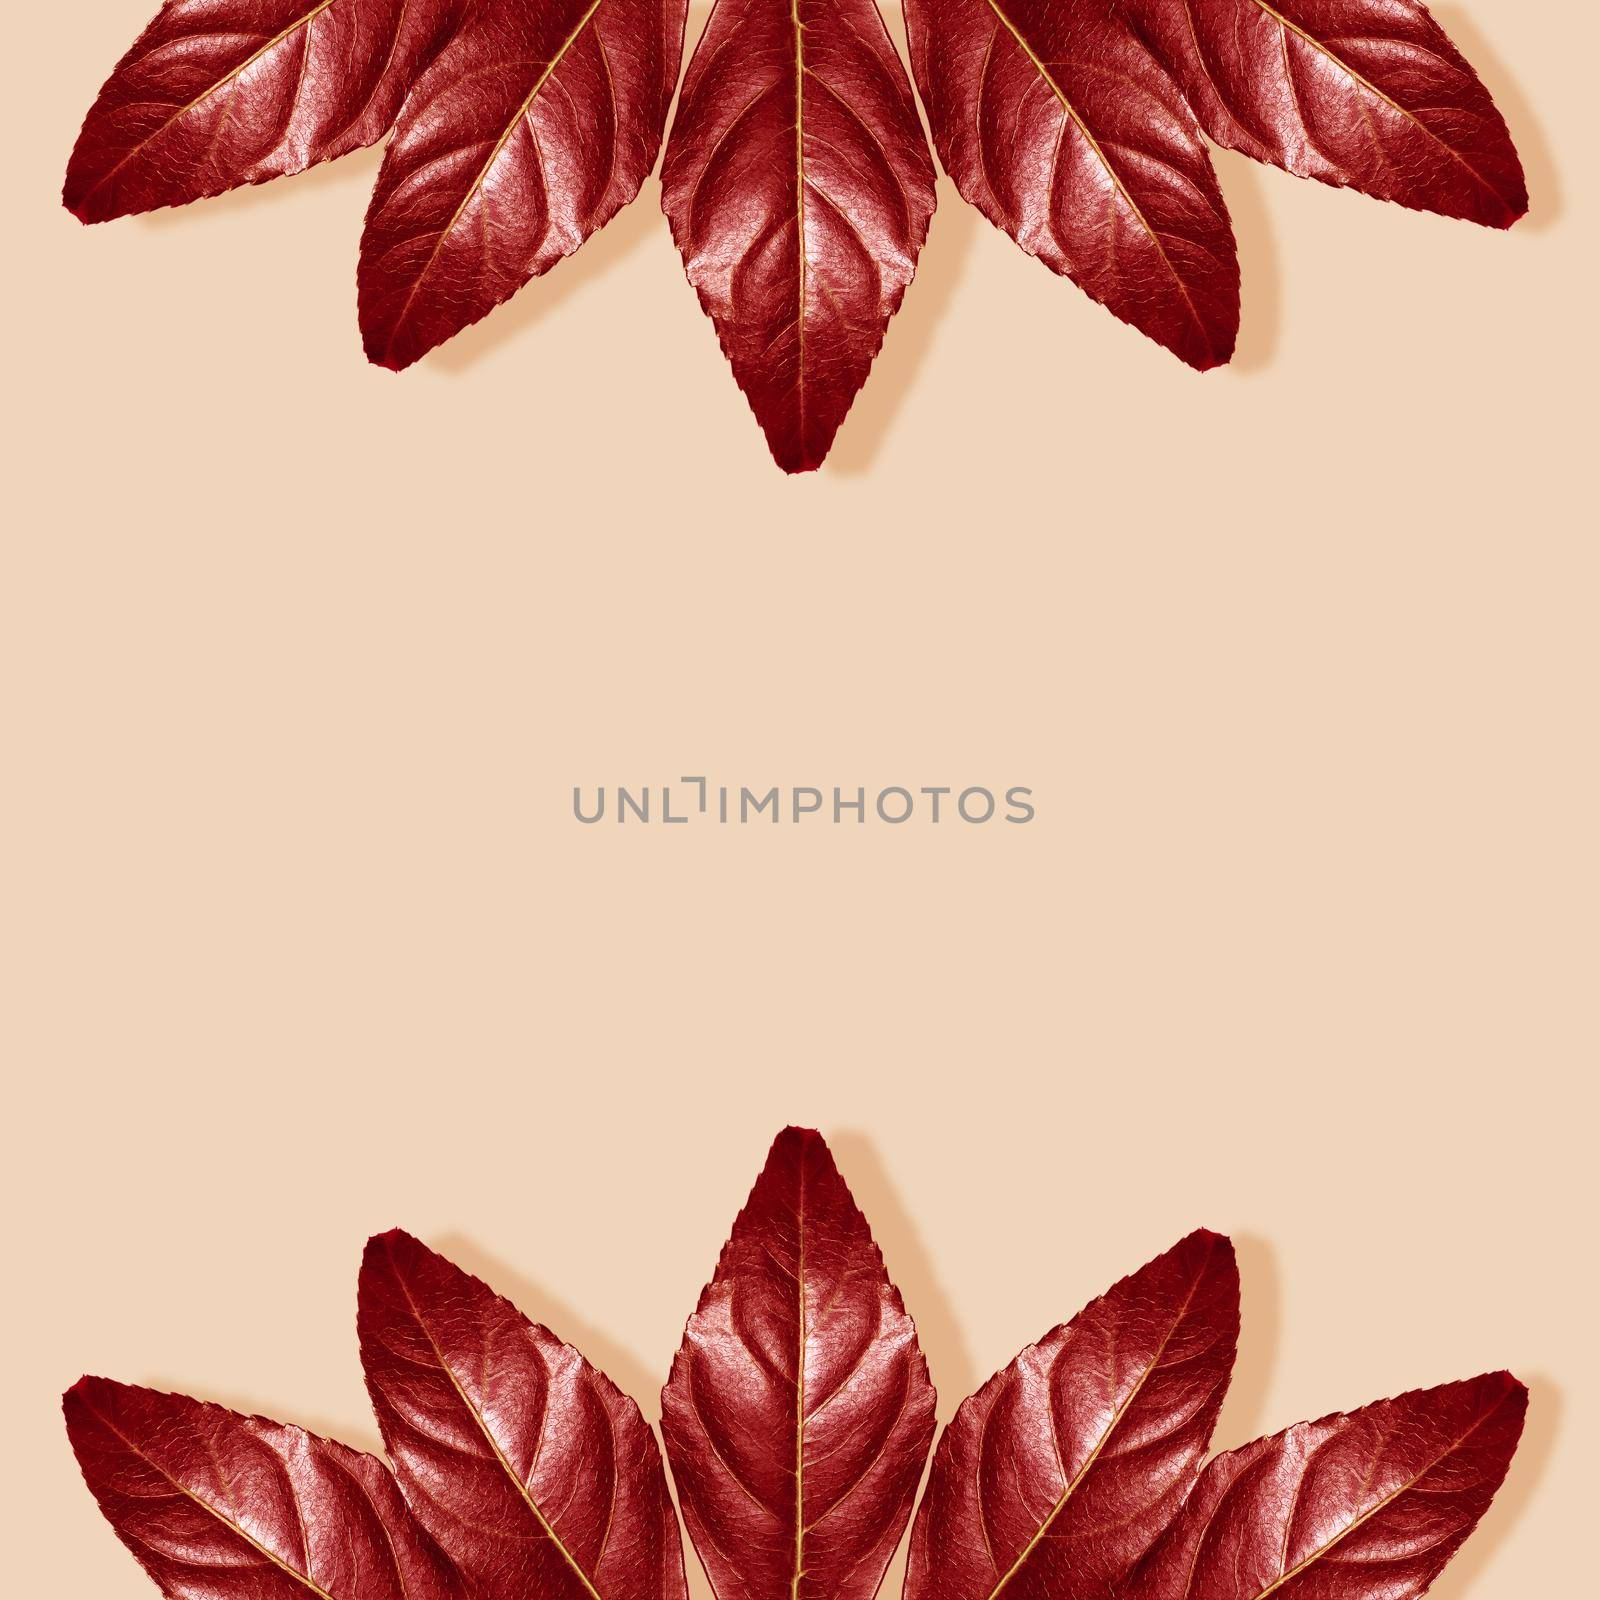 Autumn composition. Autumnal Red Leaves on Pastel Beige Background. Fall Concept. Flat Lay, Top View and Copy Space.